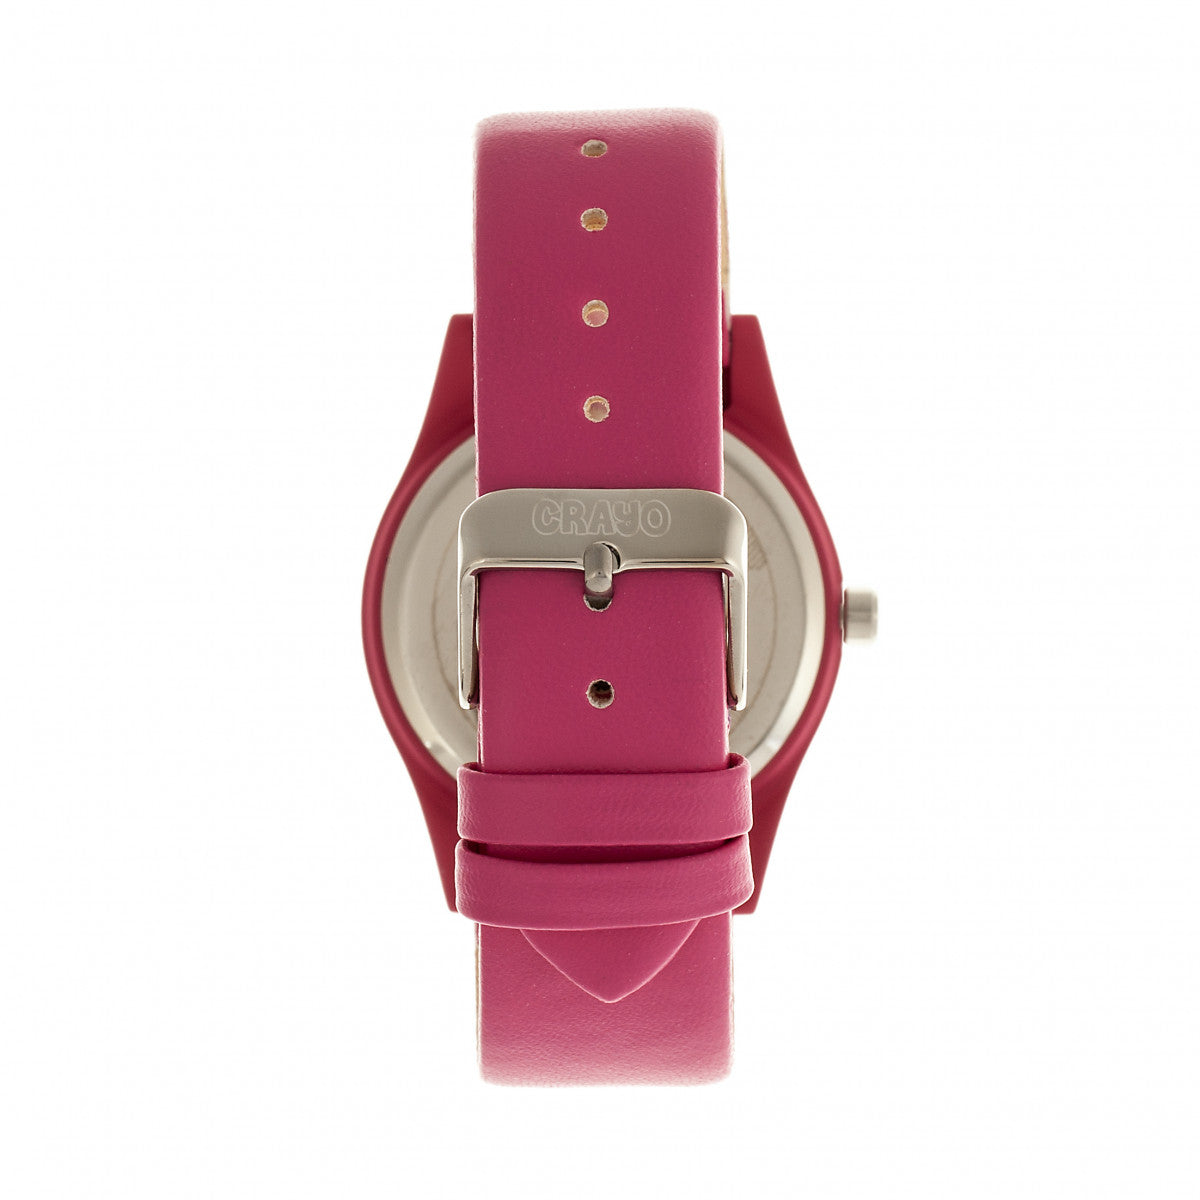 Crayo Dazzle Leather-Band Watch w/Date - Pink - CRACR4104